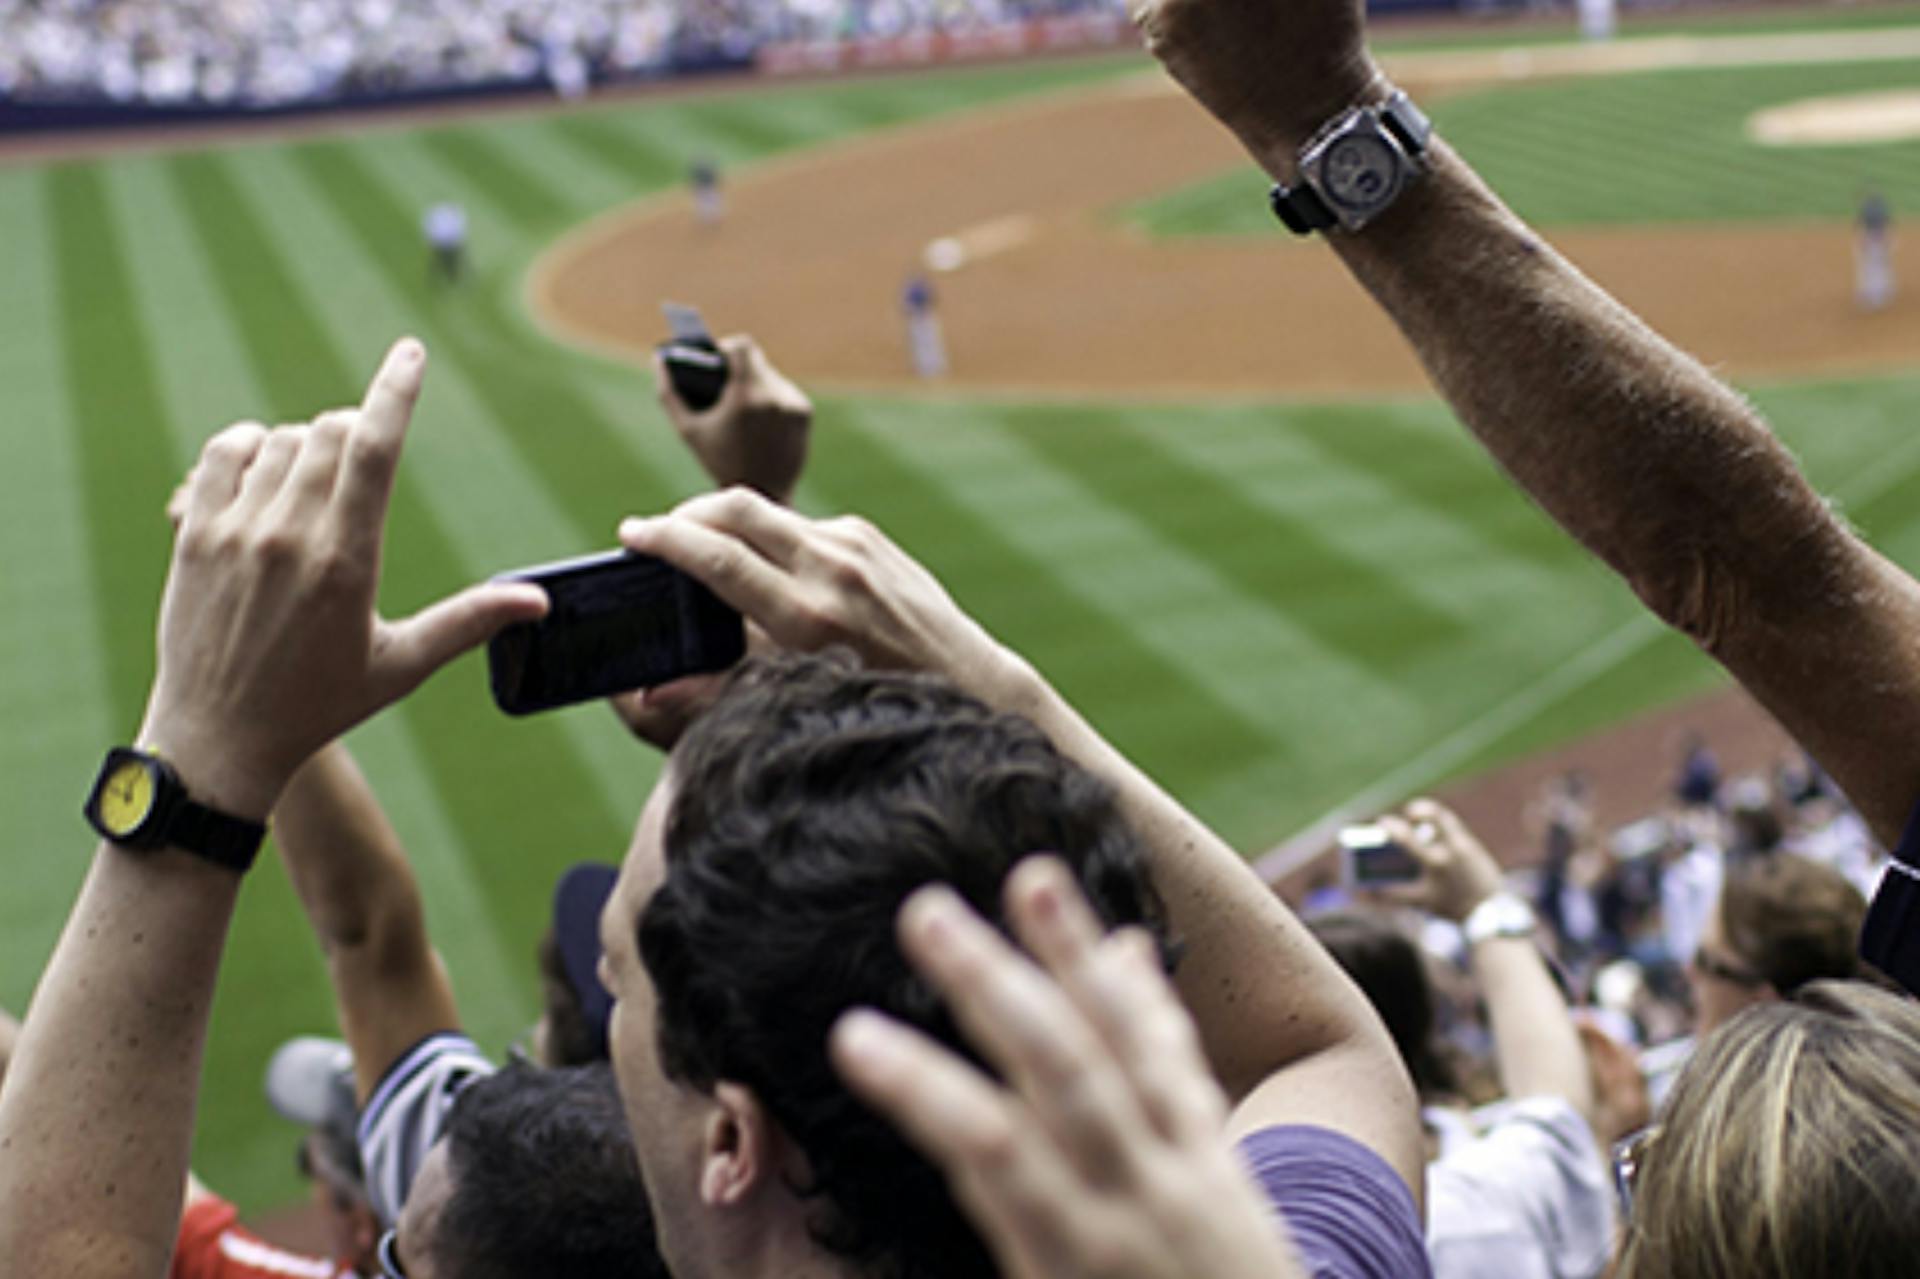 People in the crowd of a baseball game recording on their phone and cheering 